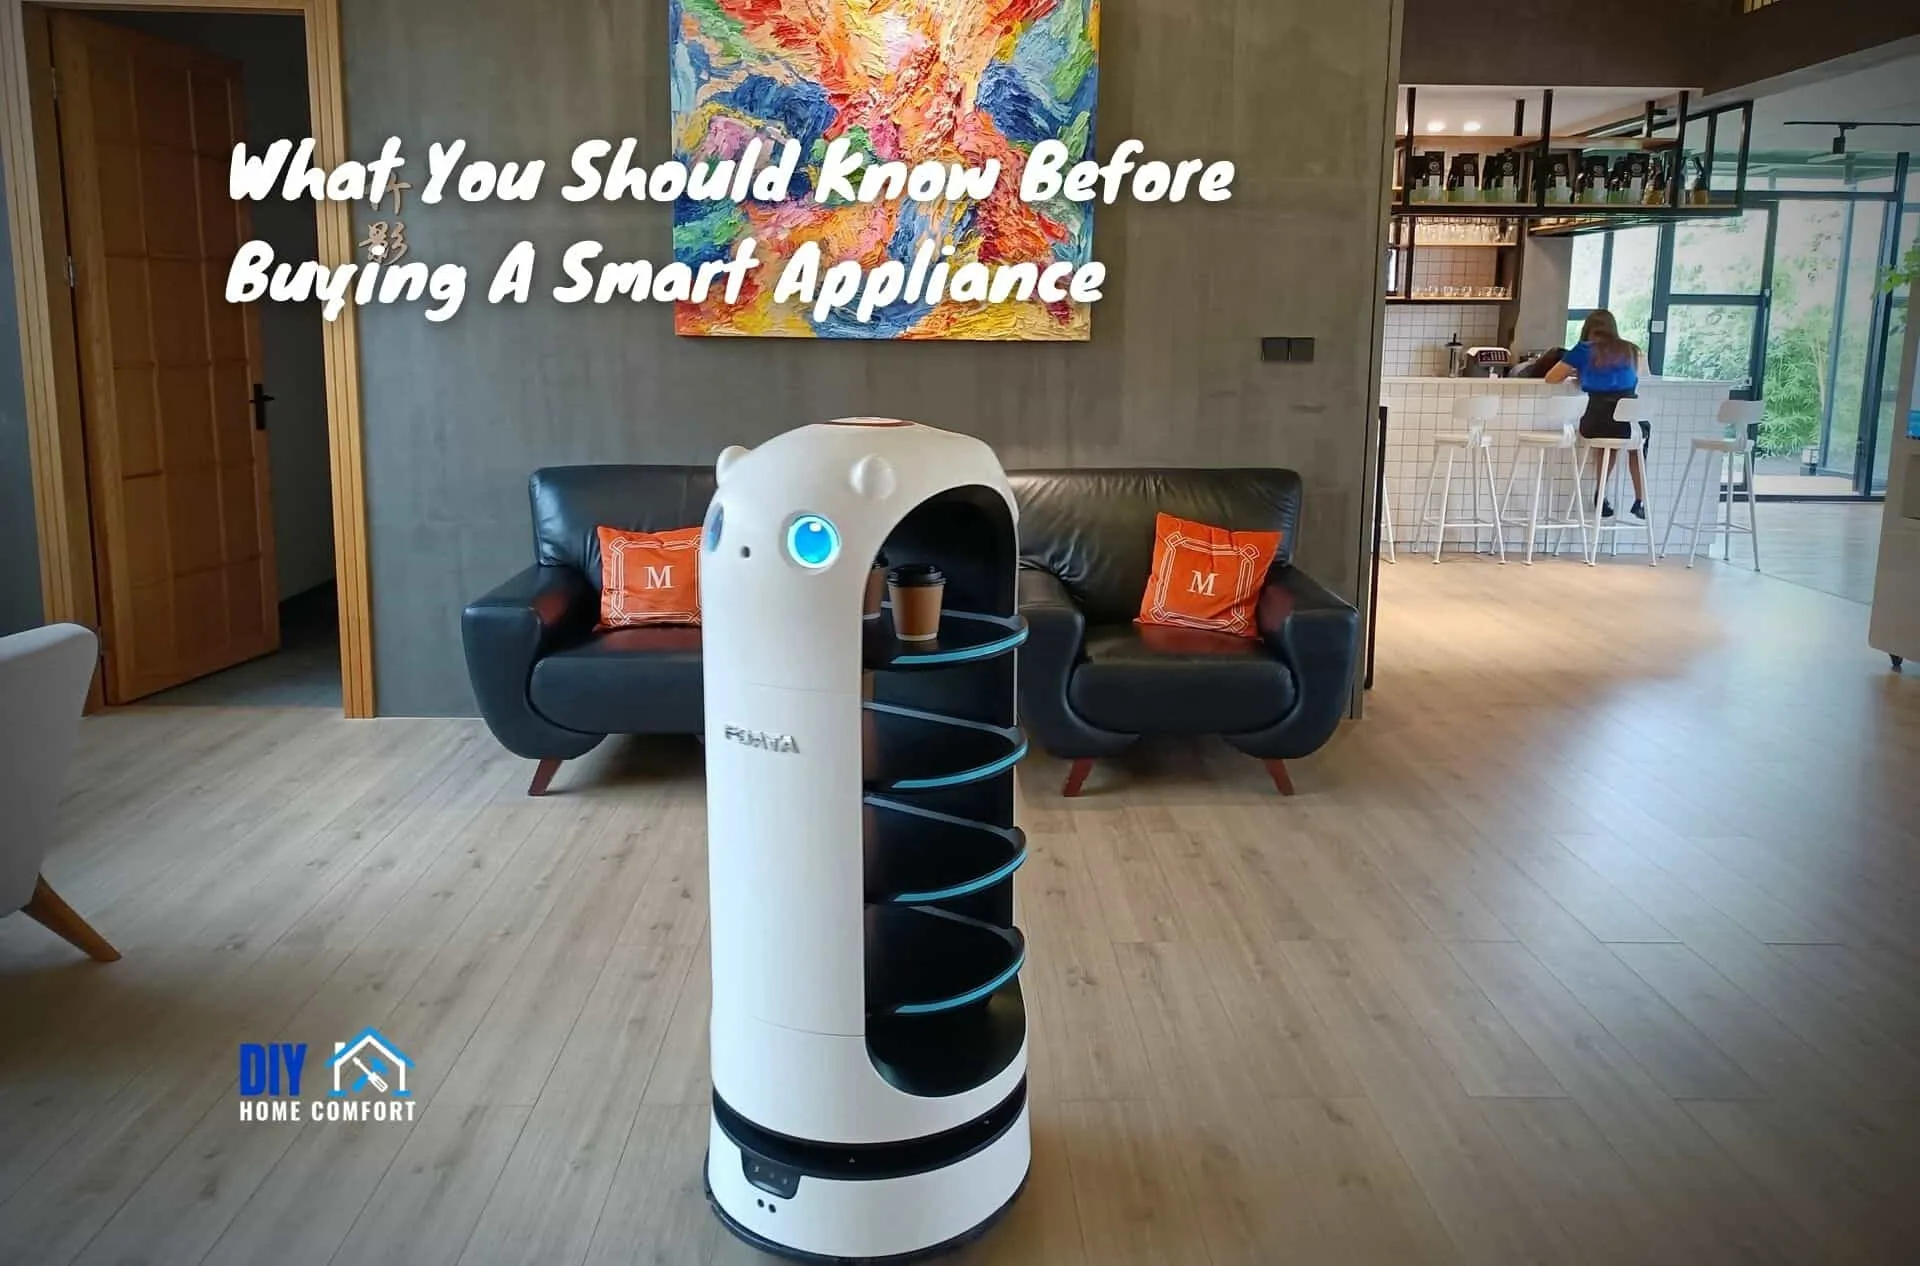 What You Should Know Before Buying A Smart Appliance | DIY Home Comfort